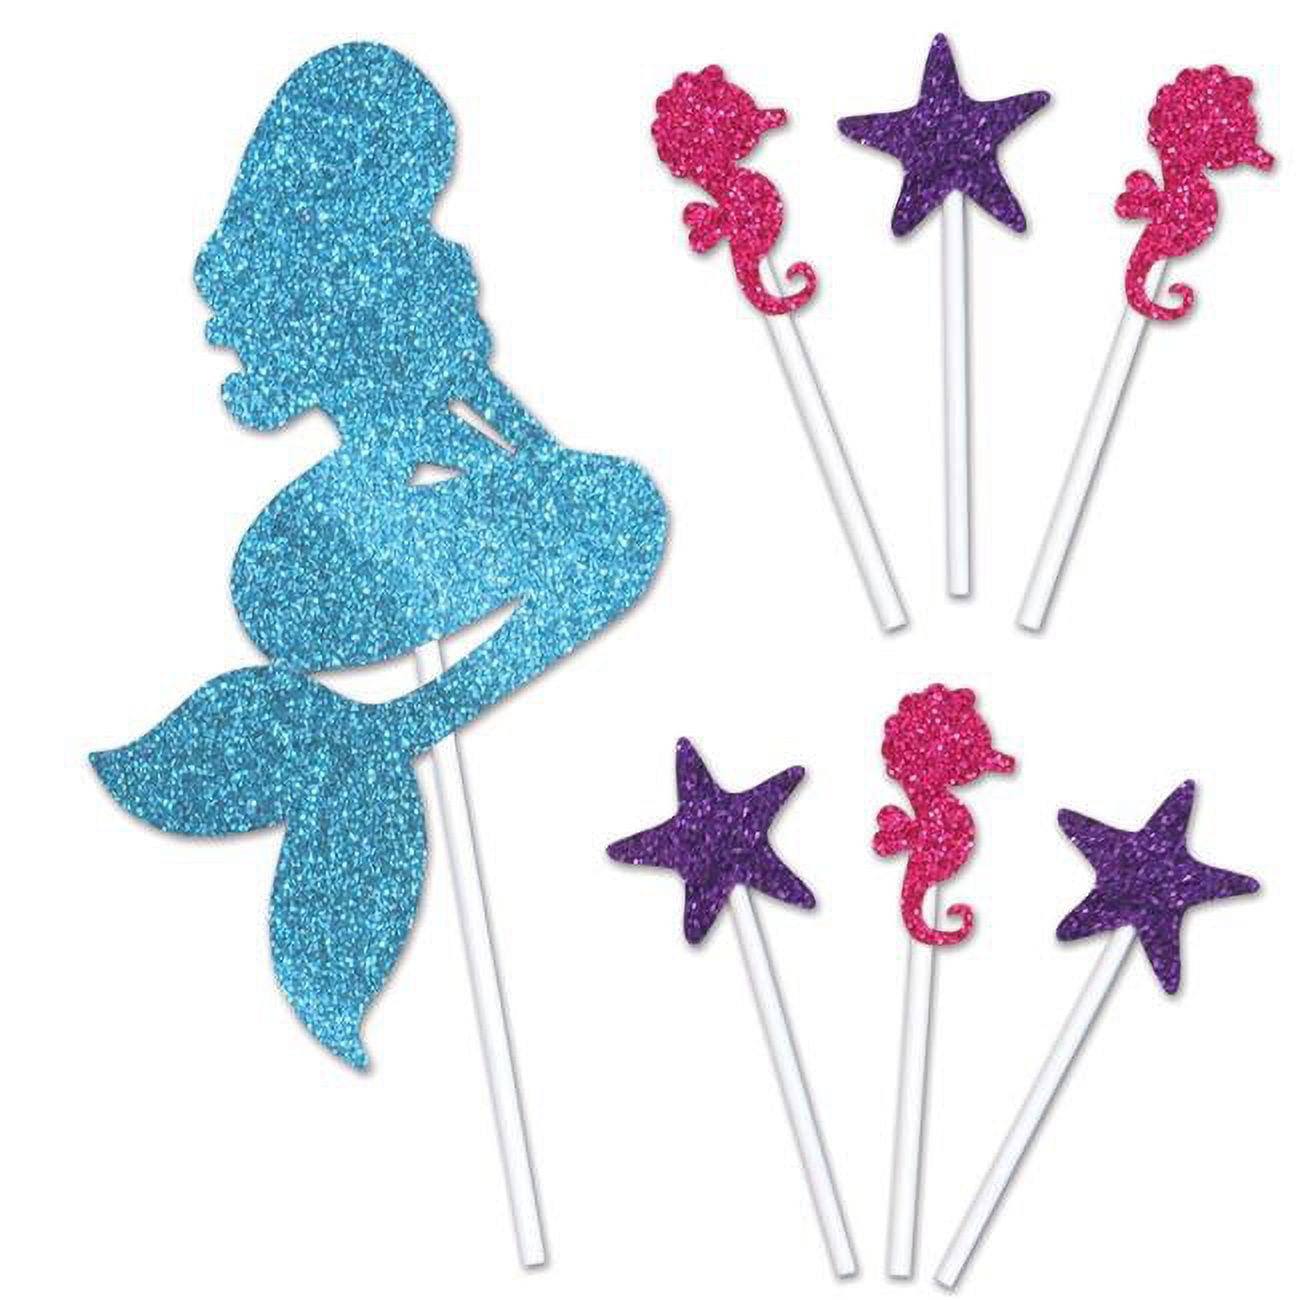 Picture of Beistle 53399 4.25 x 8.75 in. Mermaid Cake Topper - Pack of 12